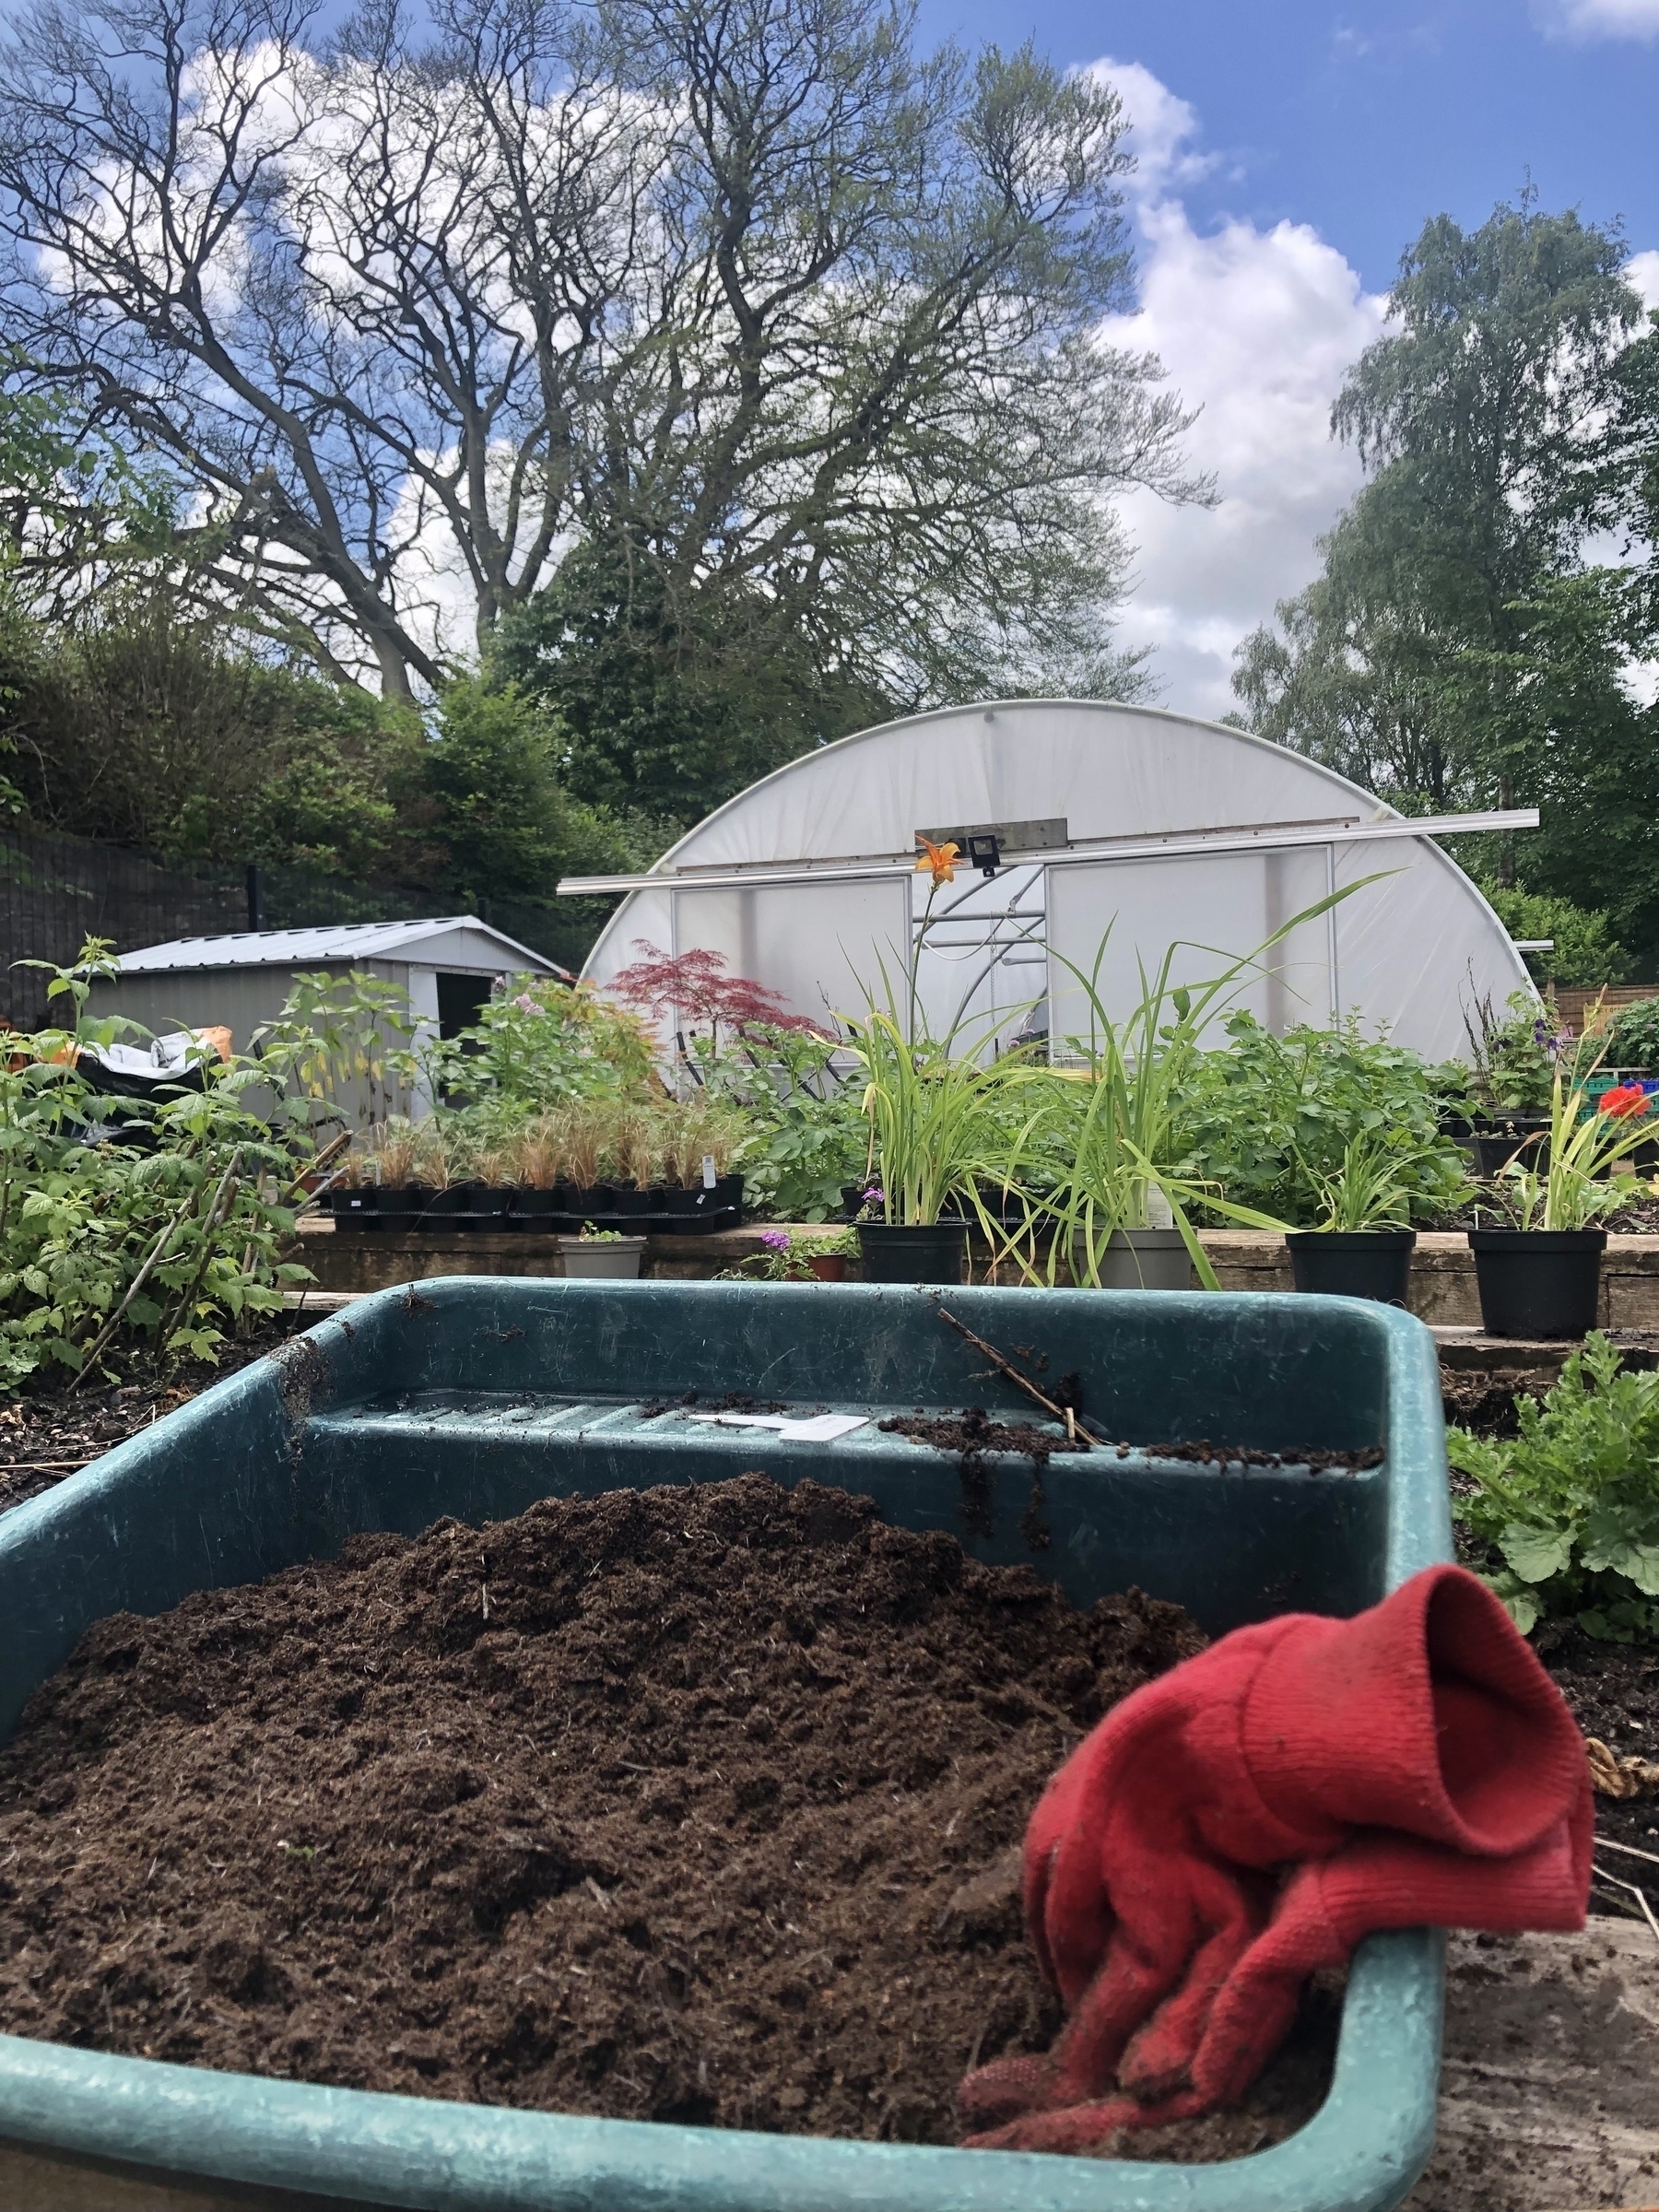 red gardening gloves in the foreground, then raised beds, flowers and a polytunnel in the background